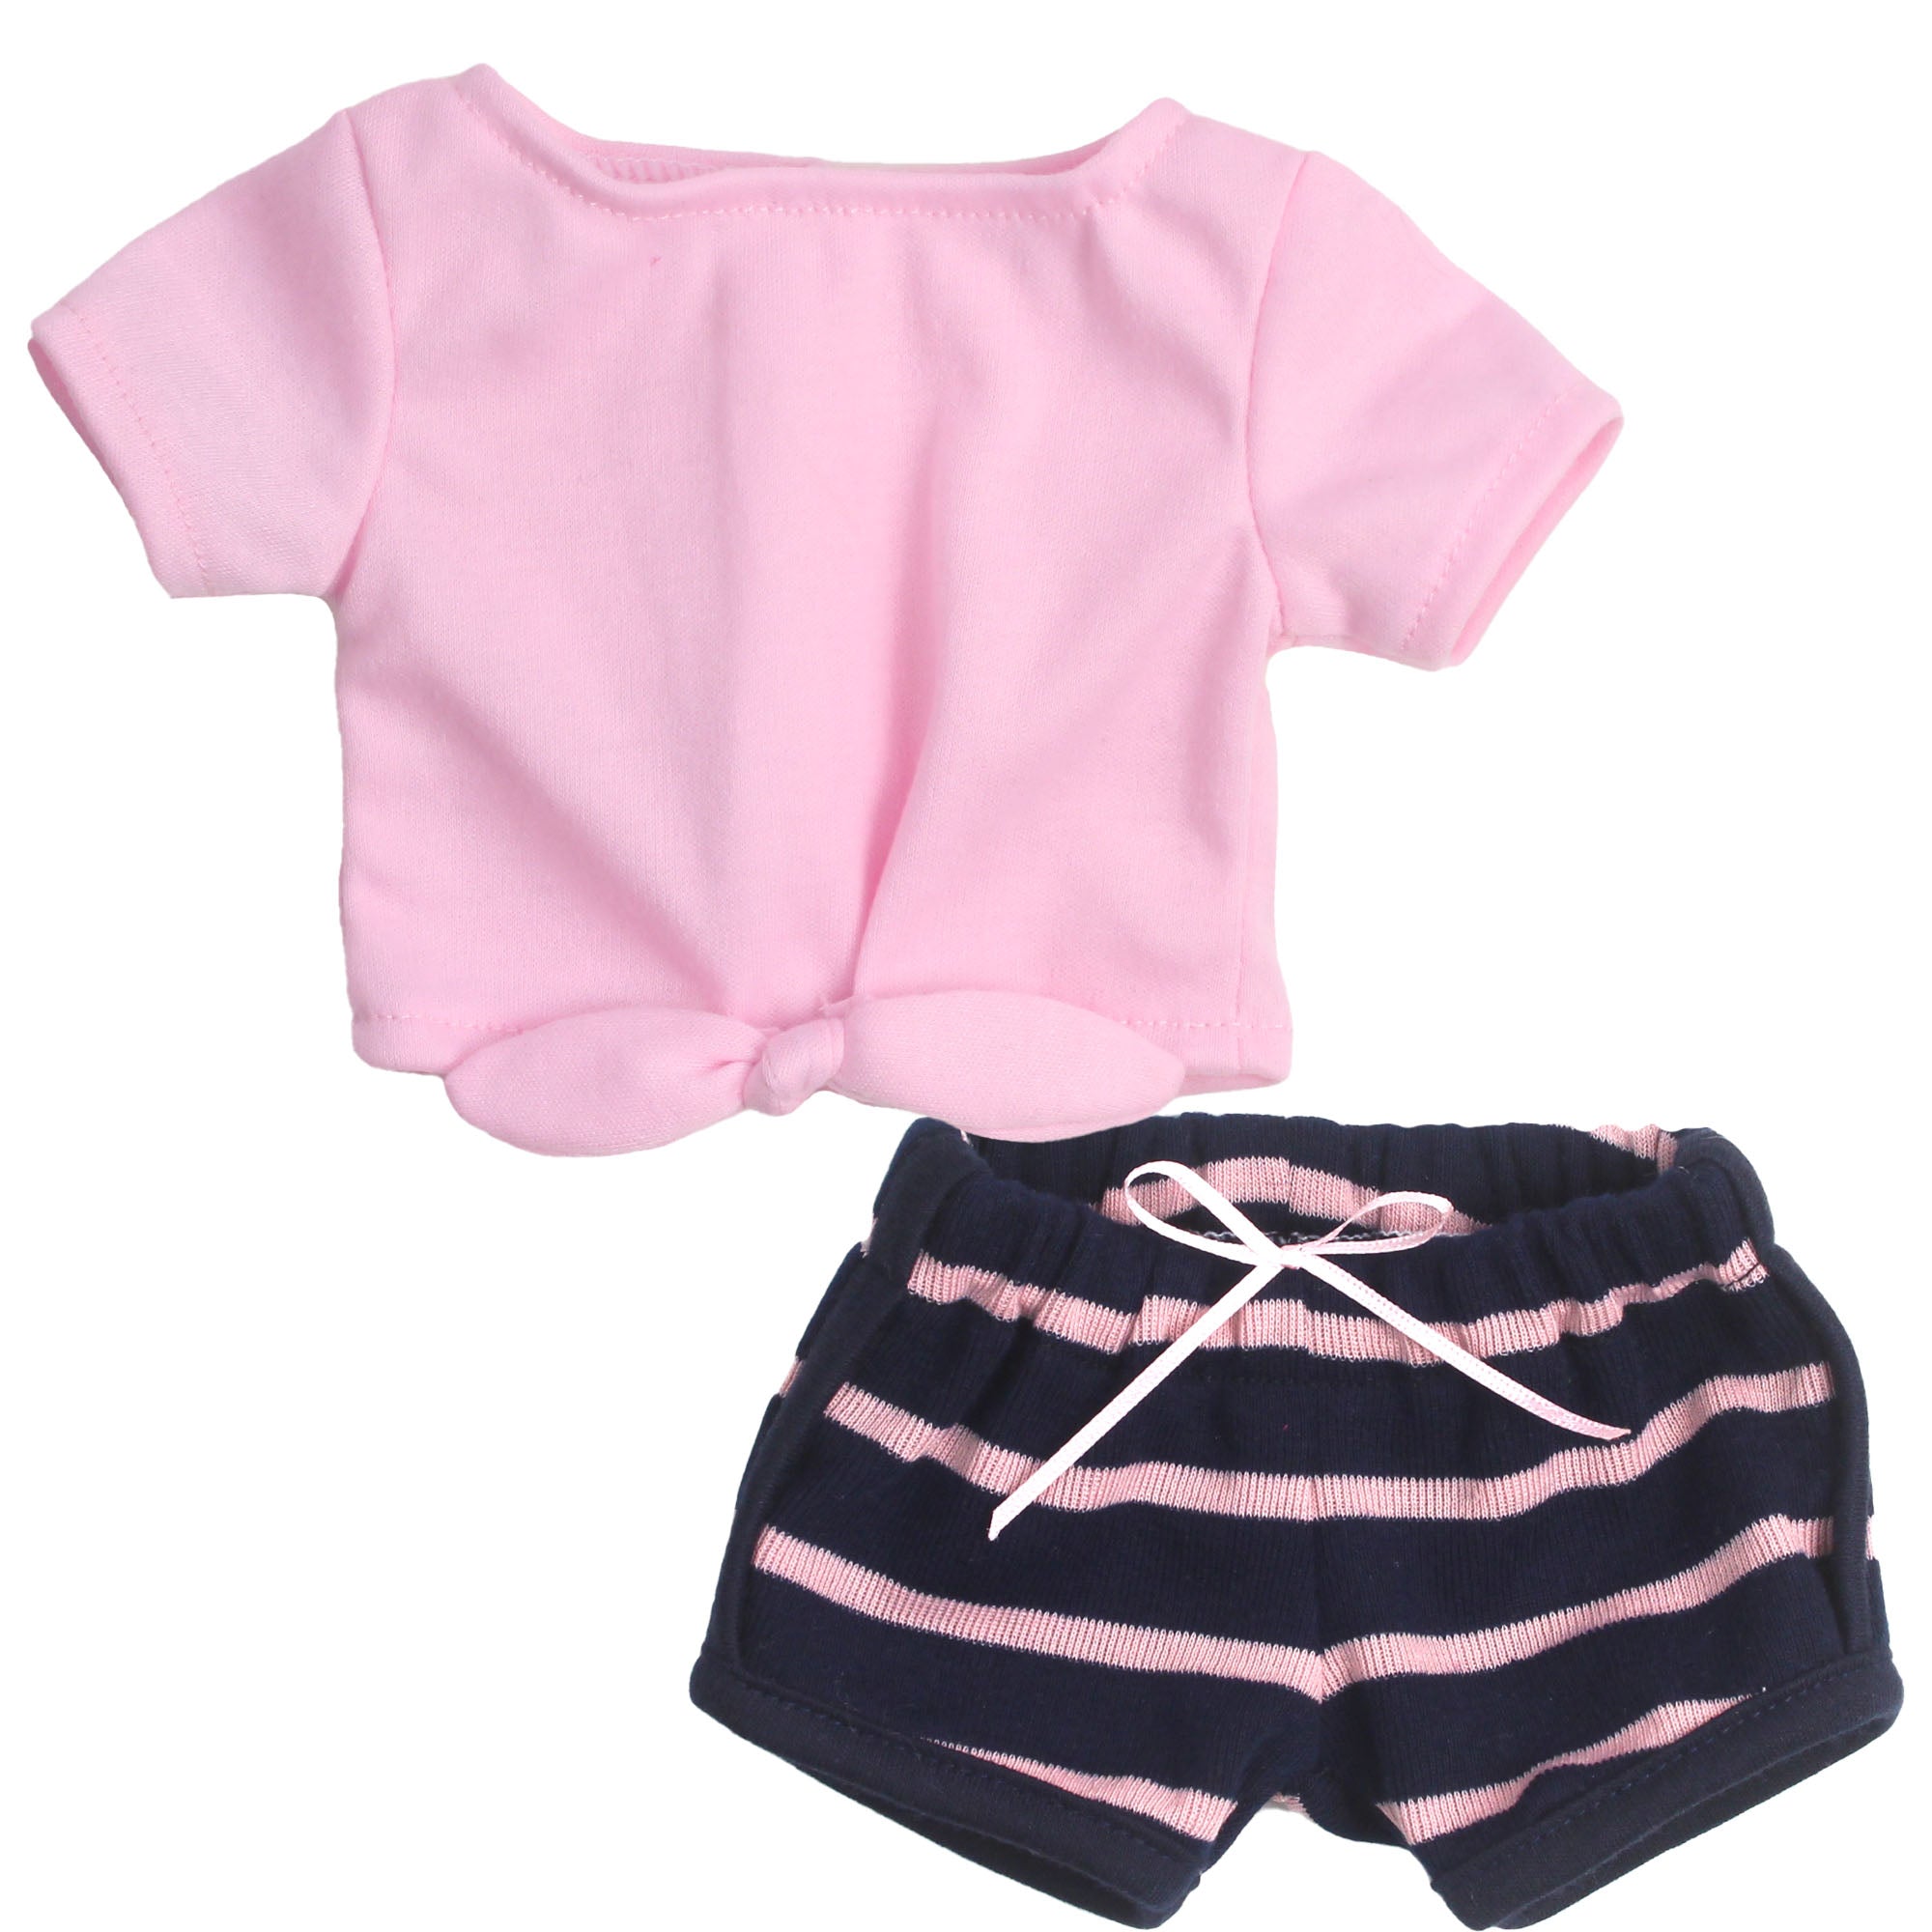 Sophia's 2 Piece Summer Outfit with Tie Front Tee and Striped Shorts for 18" Dolls, Pink/Navy